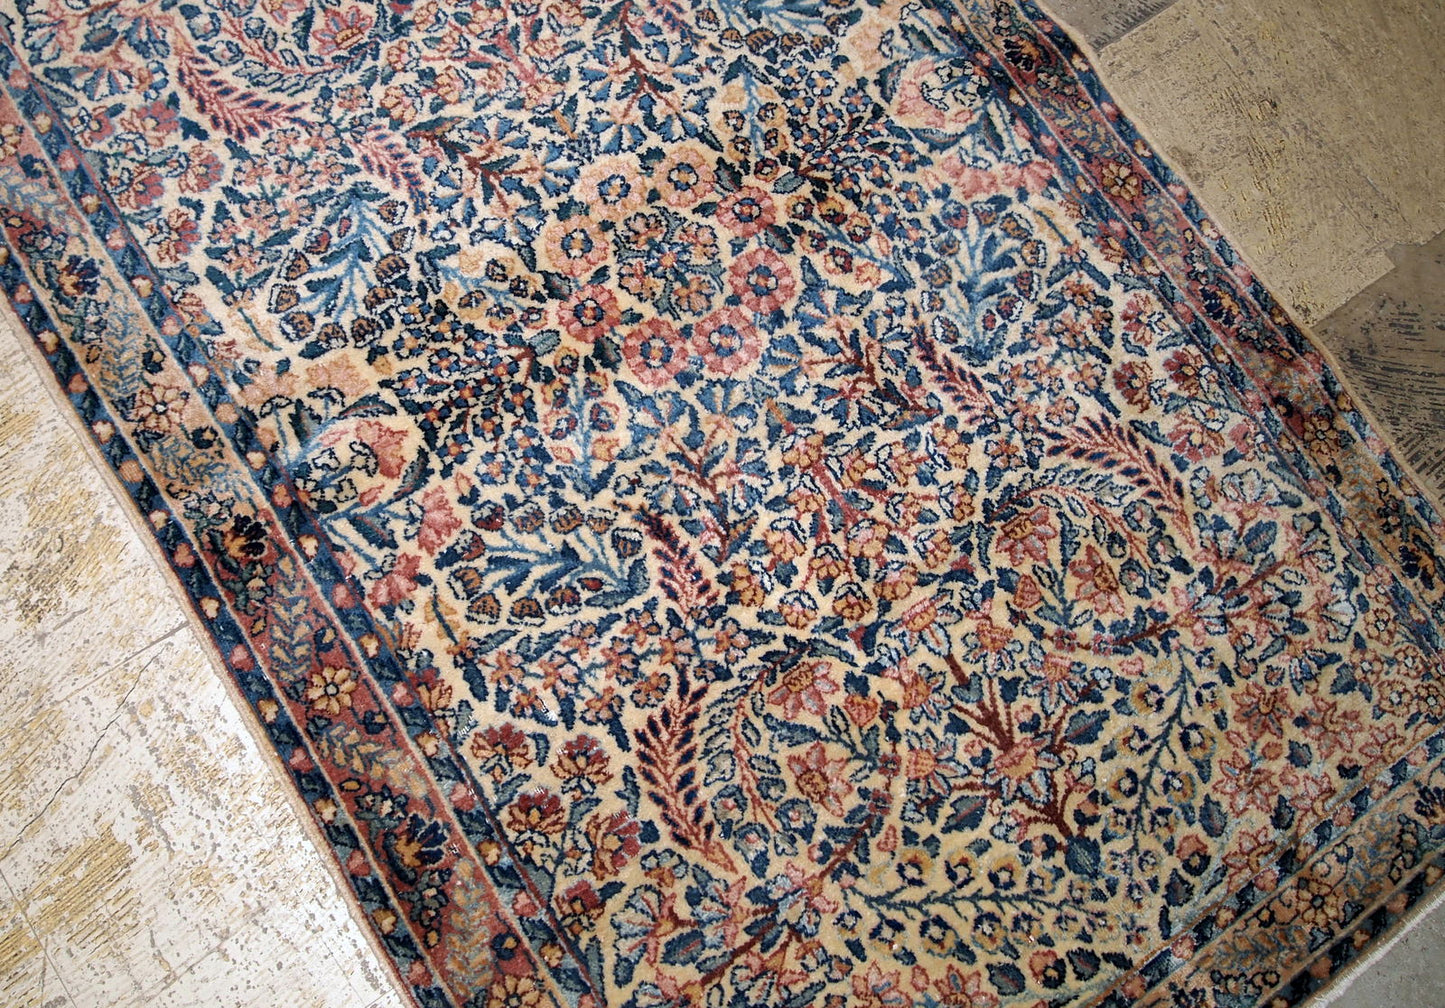 Hand made antique Kerman rug in original good condition from the beginning of 20th century. The rug in in beige shade and with classic floral design.